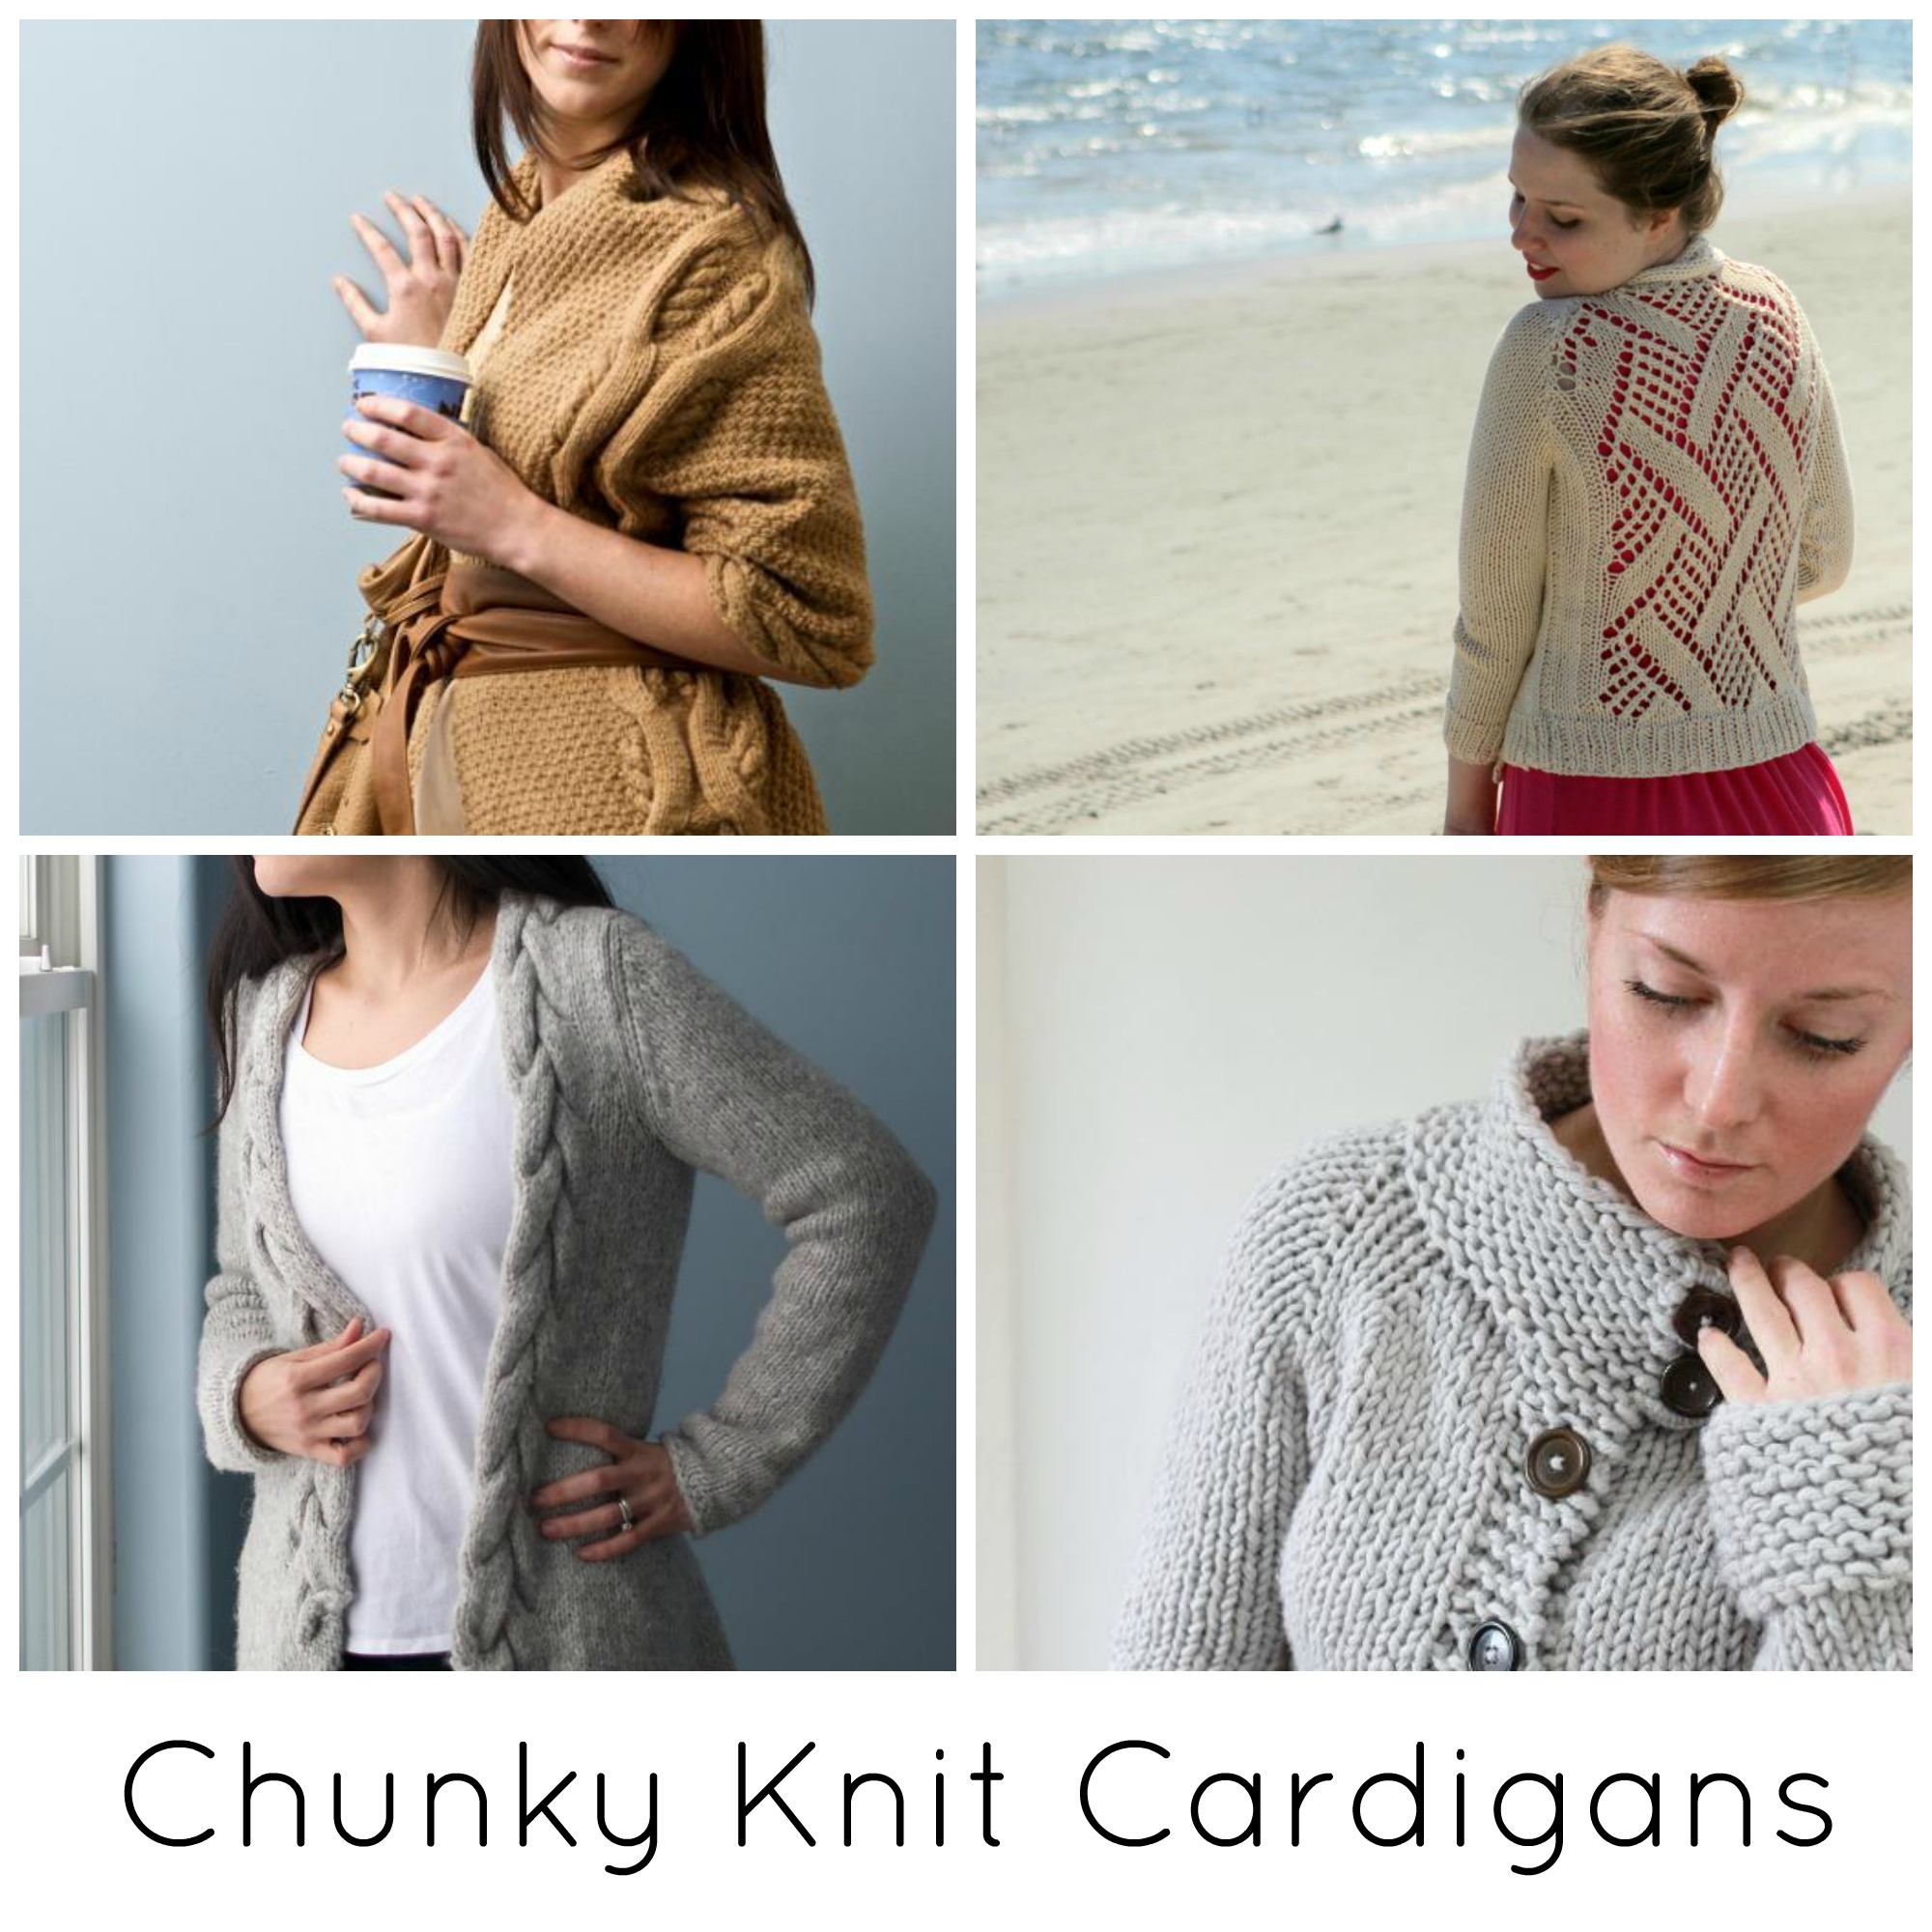 Free Sweater Patterns To Knit The Coziest Chunky Knit Cardigan Patterns Ever